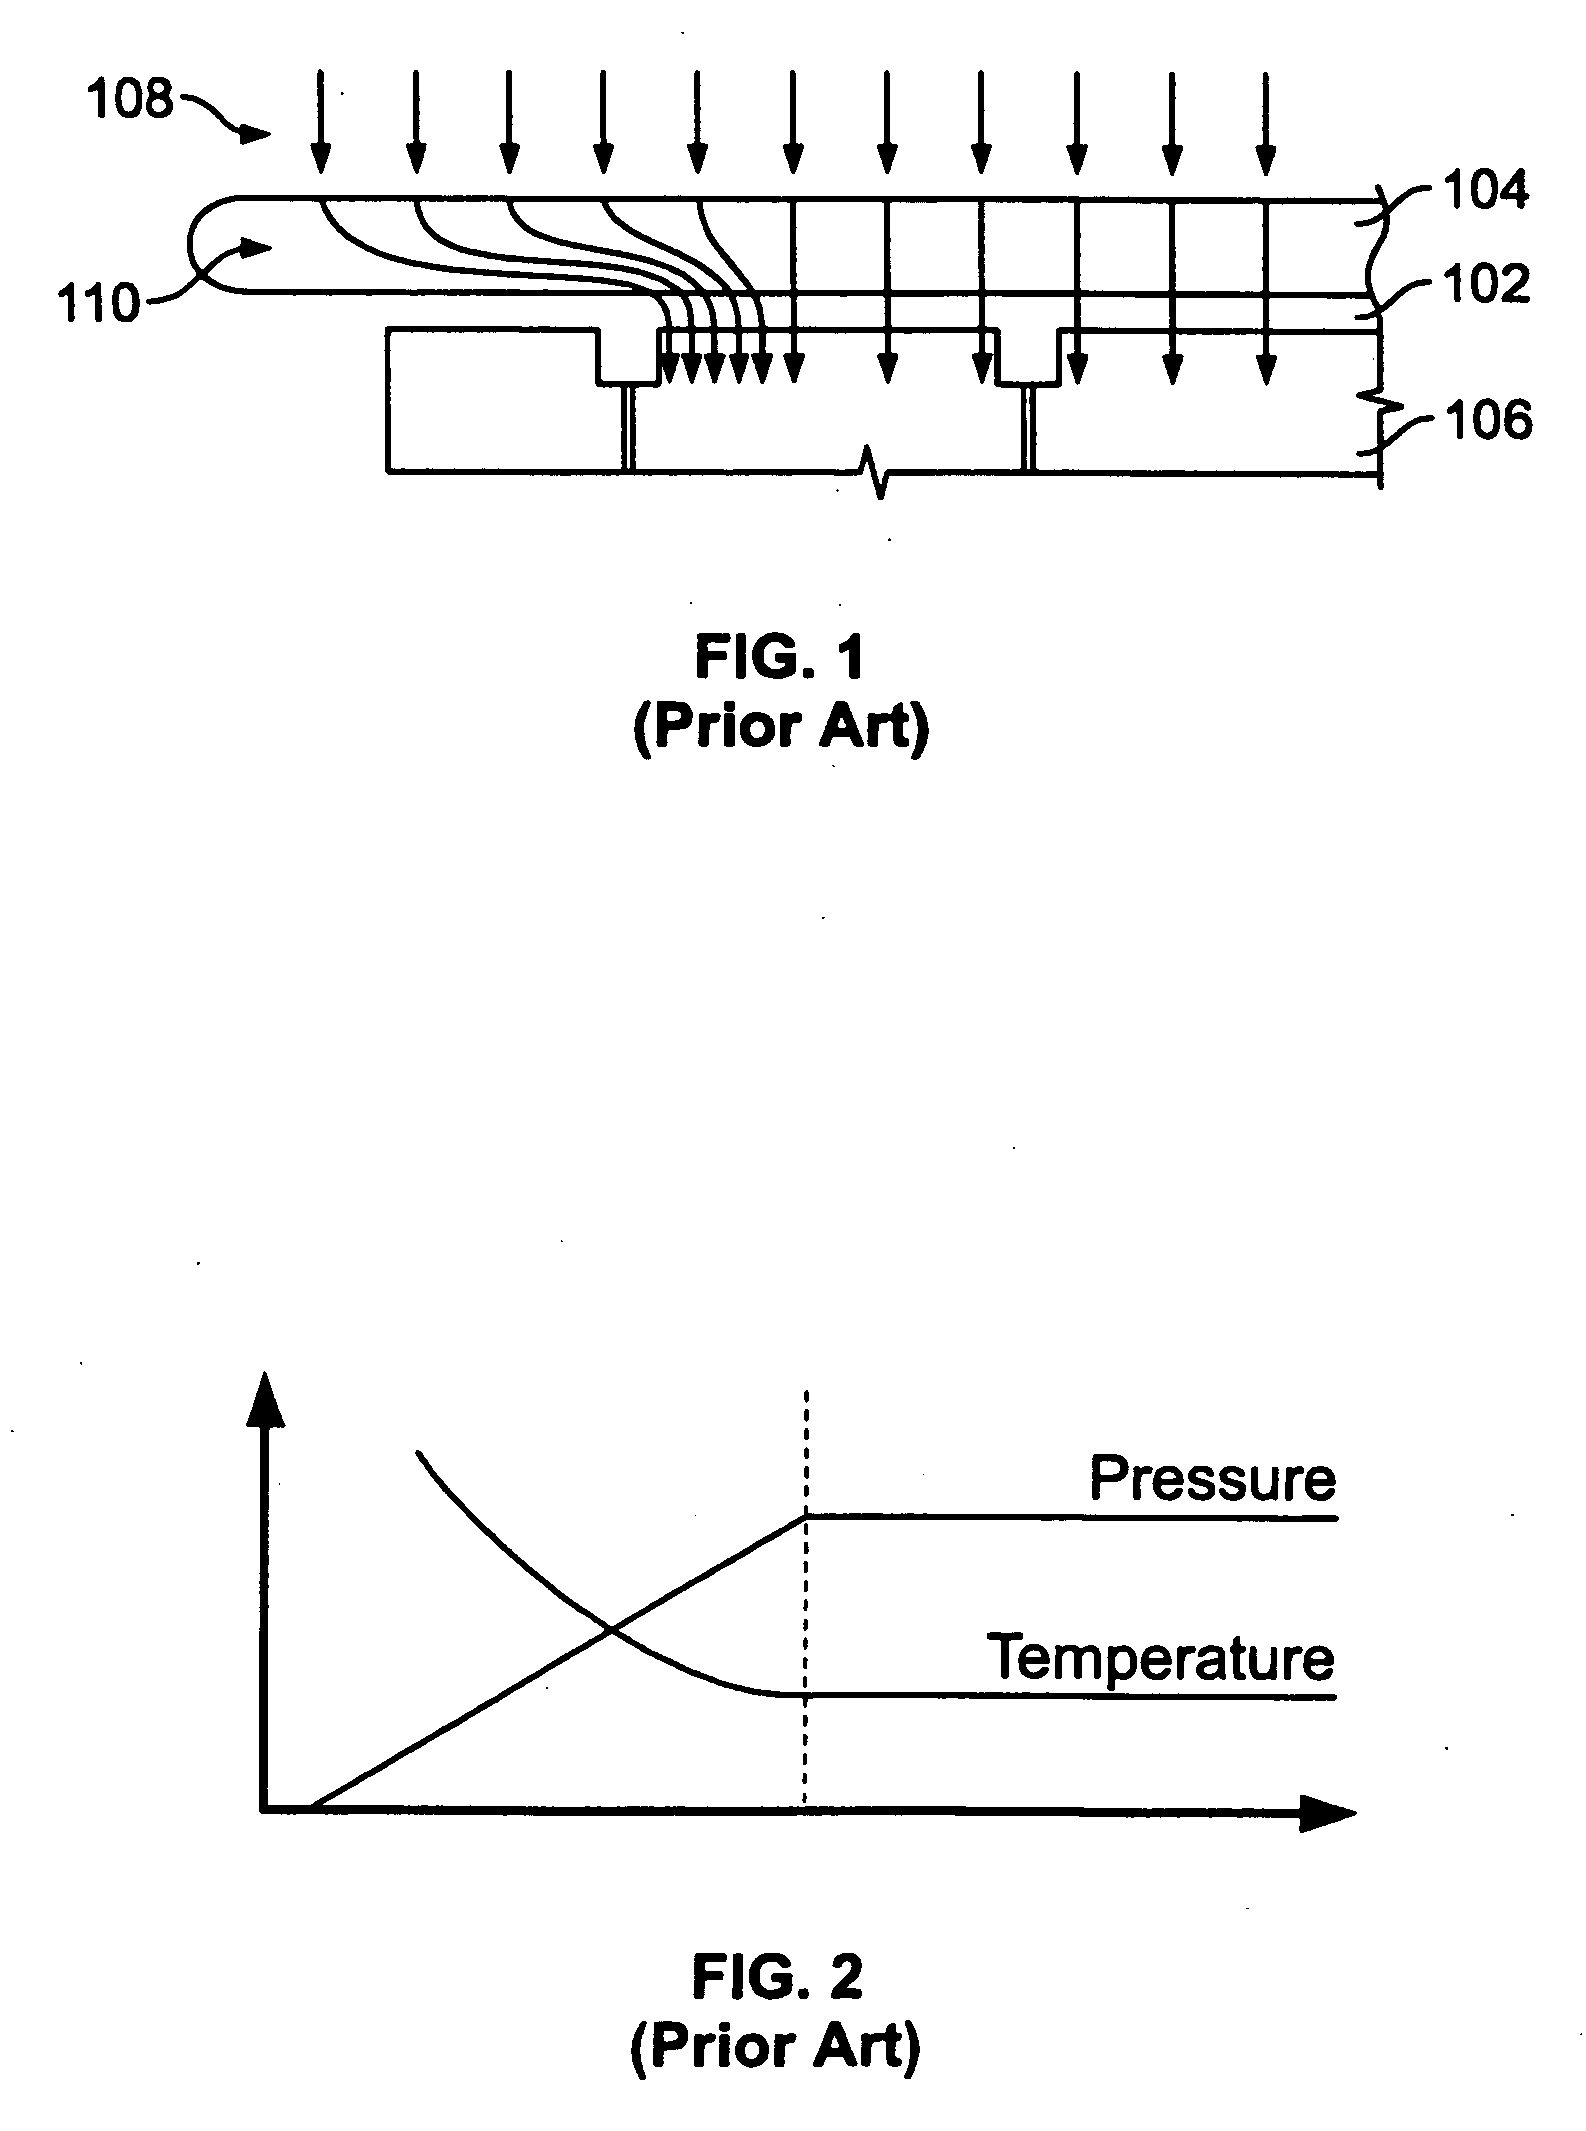 Apparatus for spatial and temporal control of temperature on a substrate